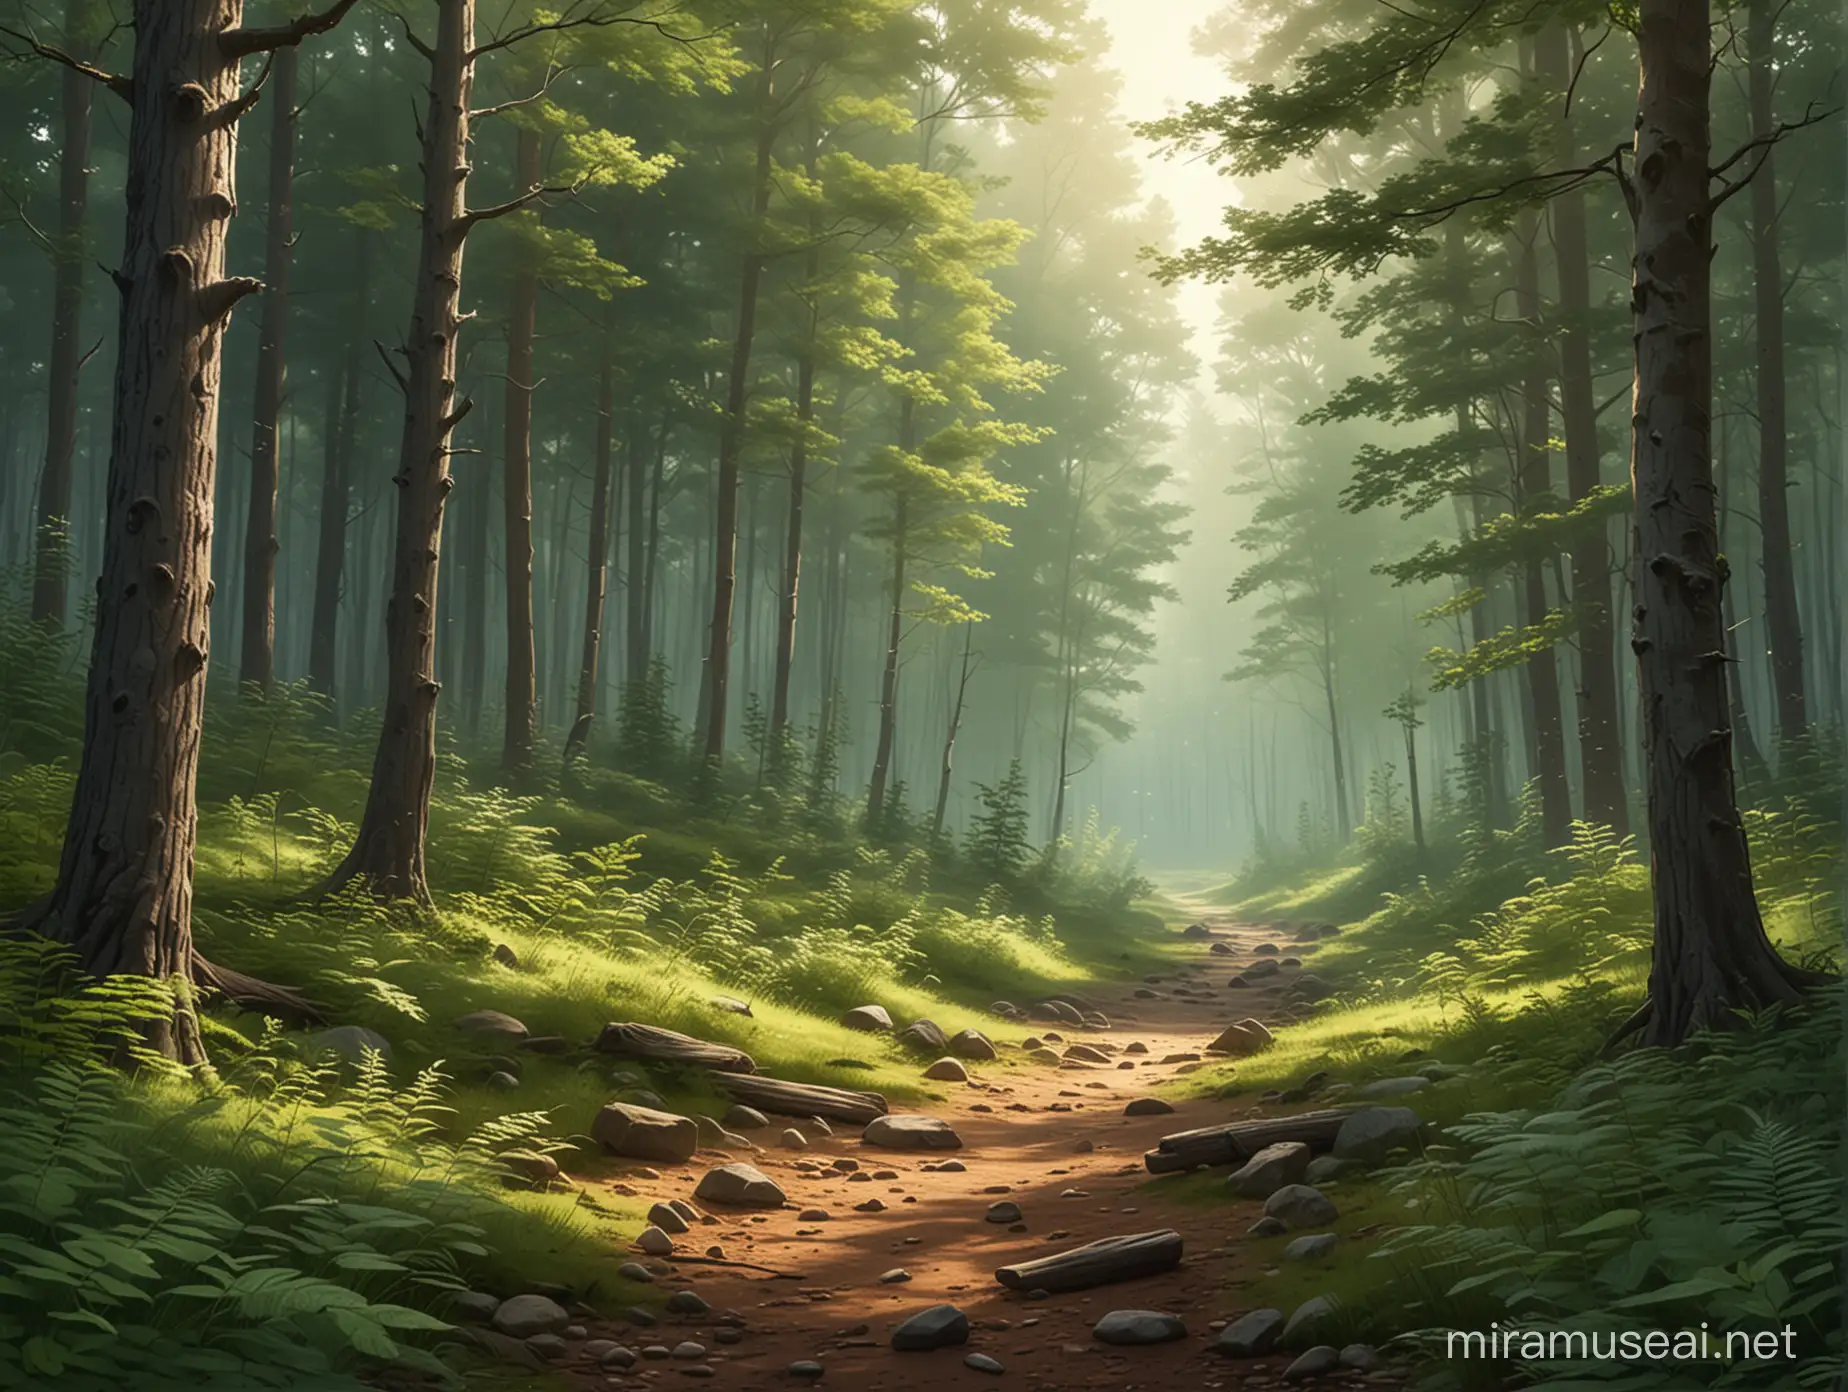 Generate a VECTOR image of a serene forest scene. The forest should have a calming and safe ambiance. Focus on depicting the tranquility and beauty of nature.